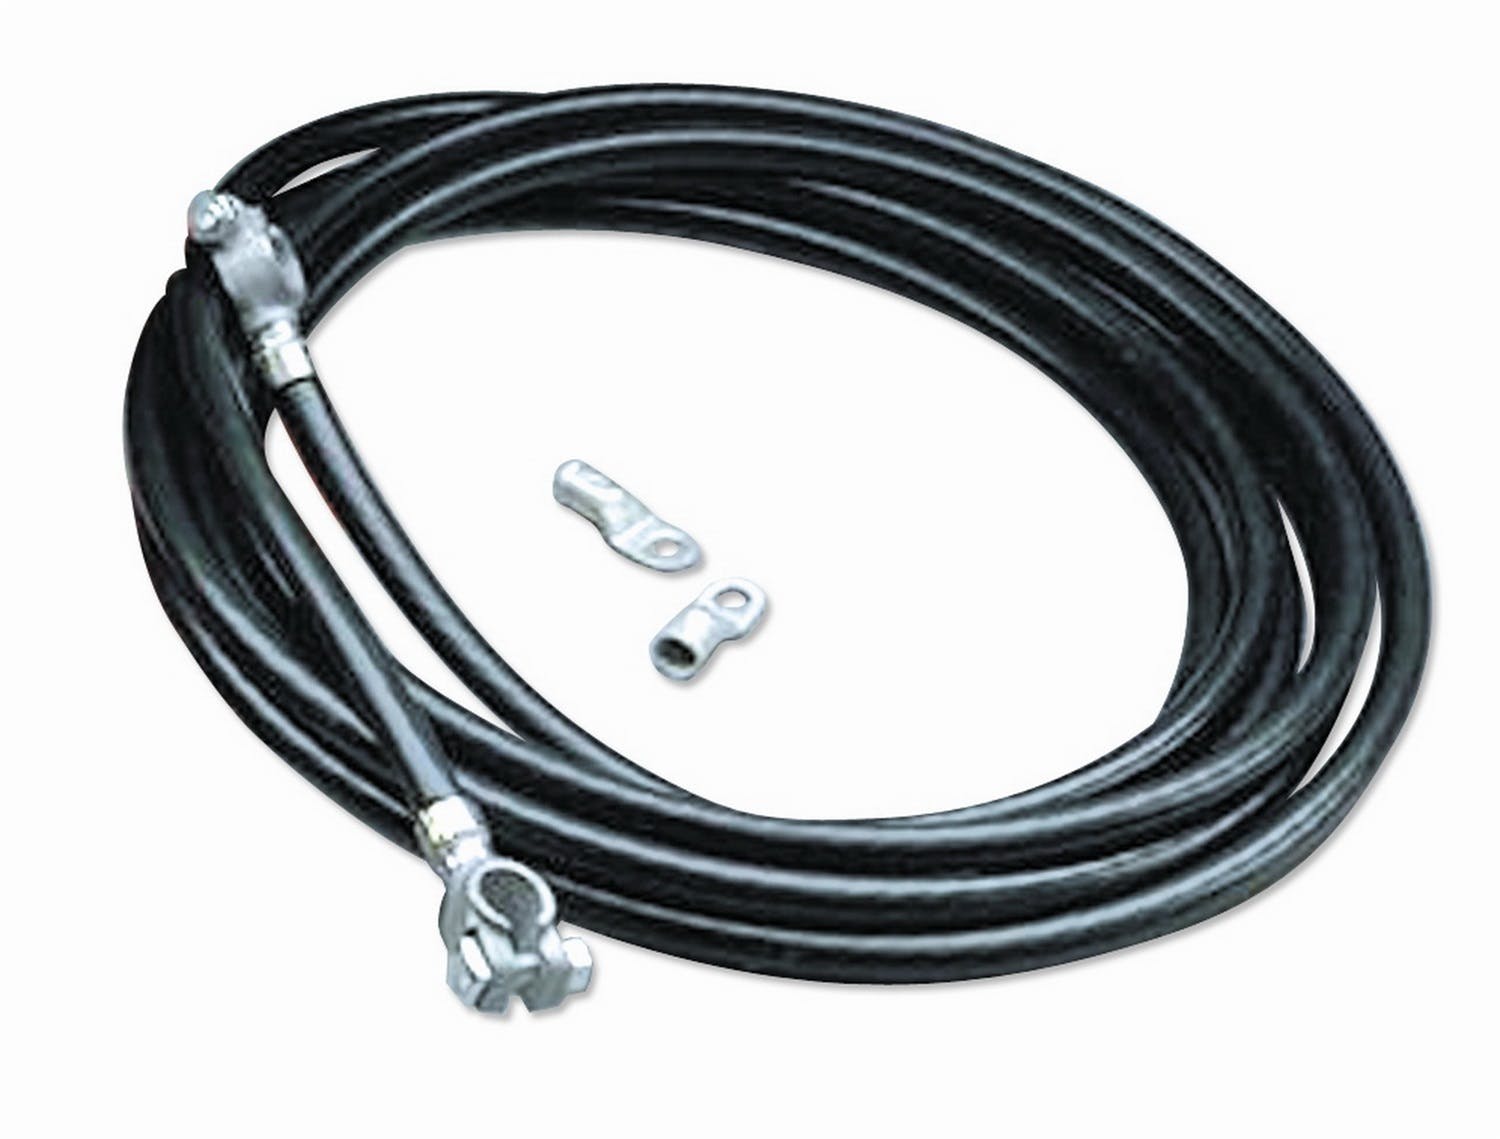 Taylor Cable Products 21552 1 ga black 20ft Welding/Battery Cable Kit